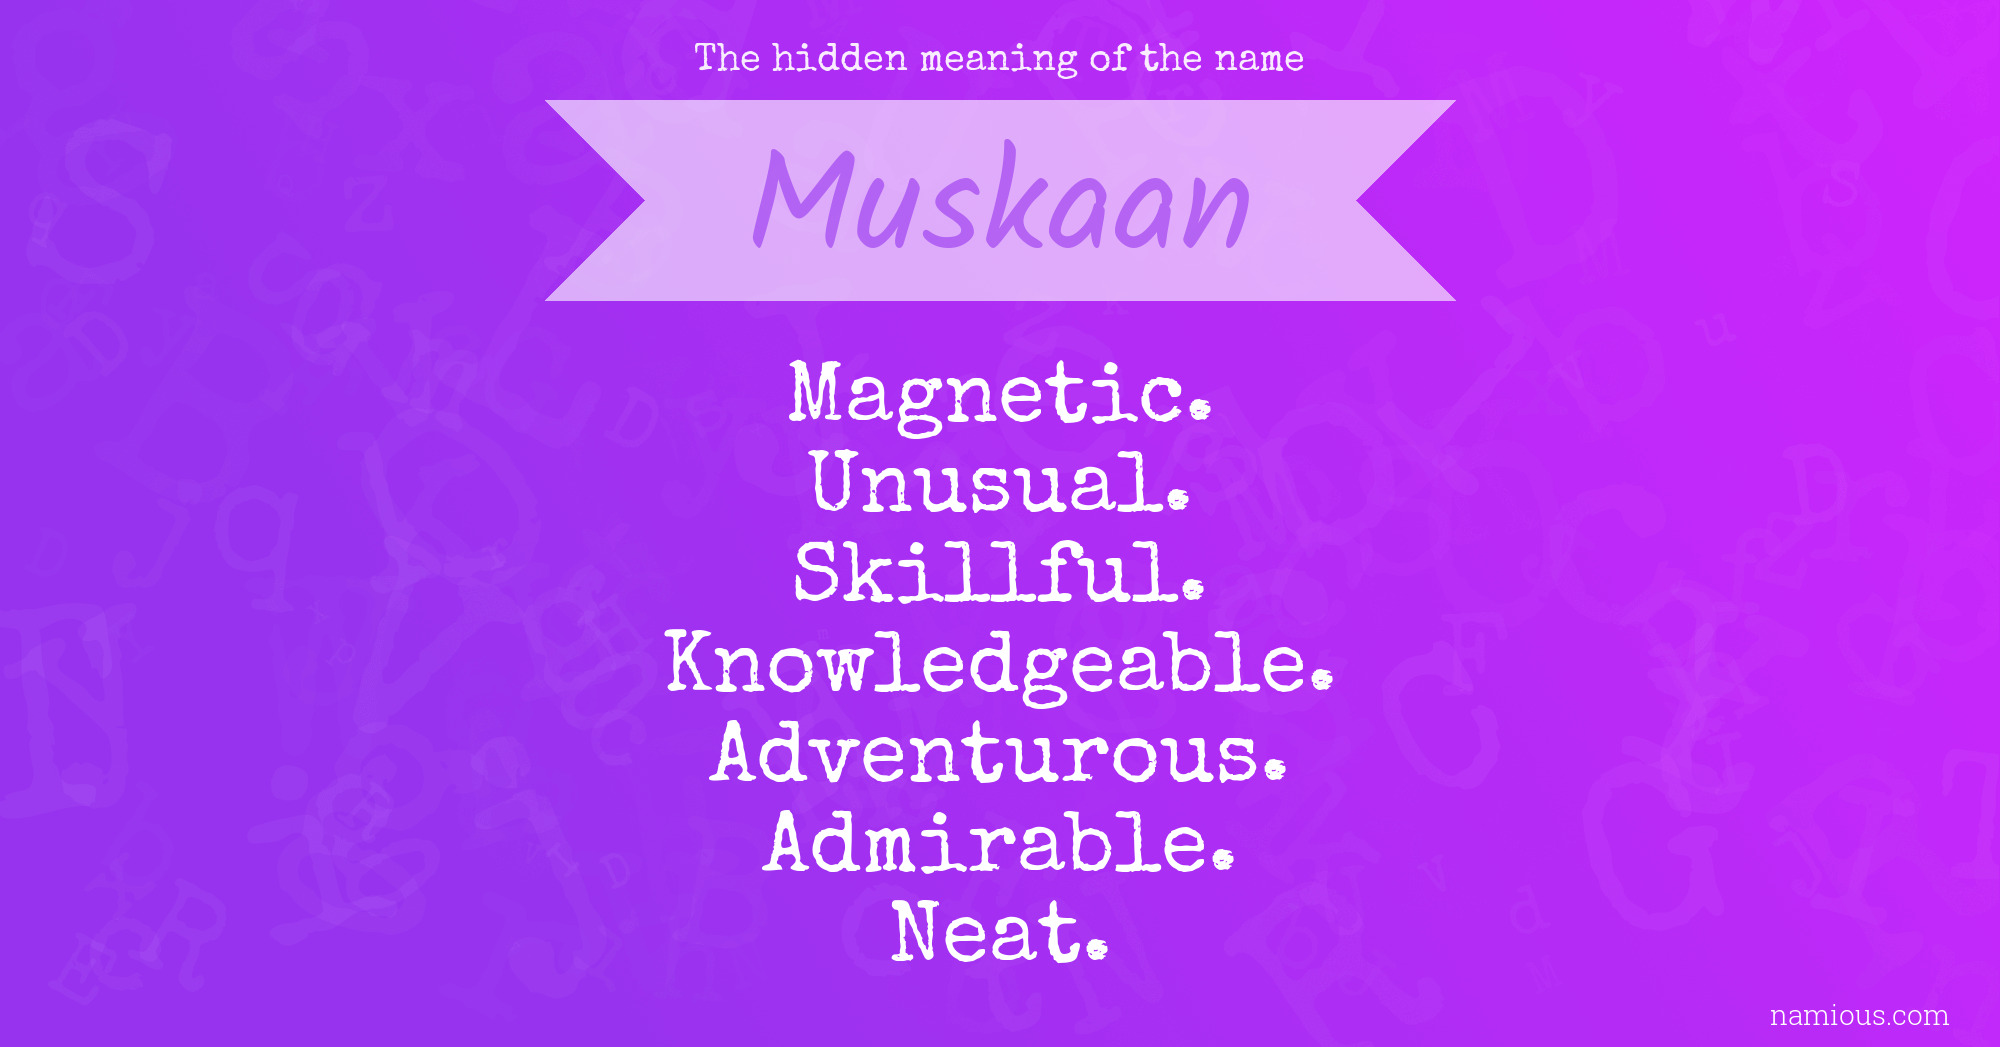 The hidden meaning of the name Muskaan